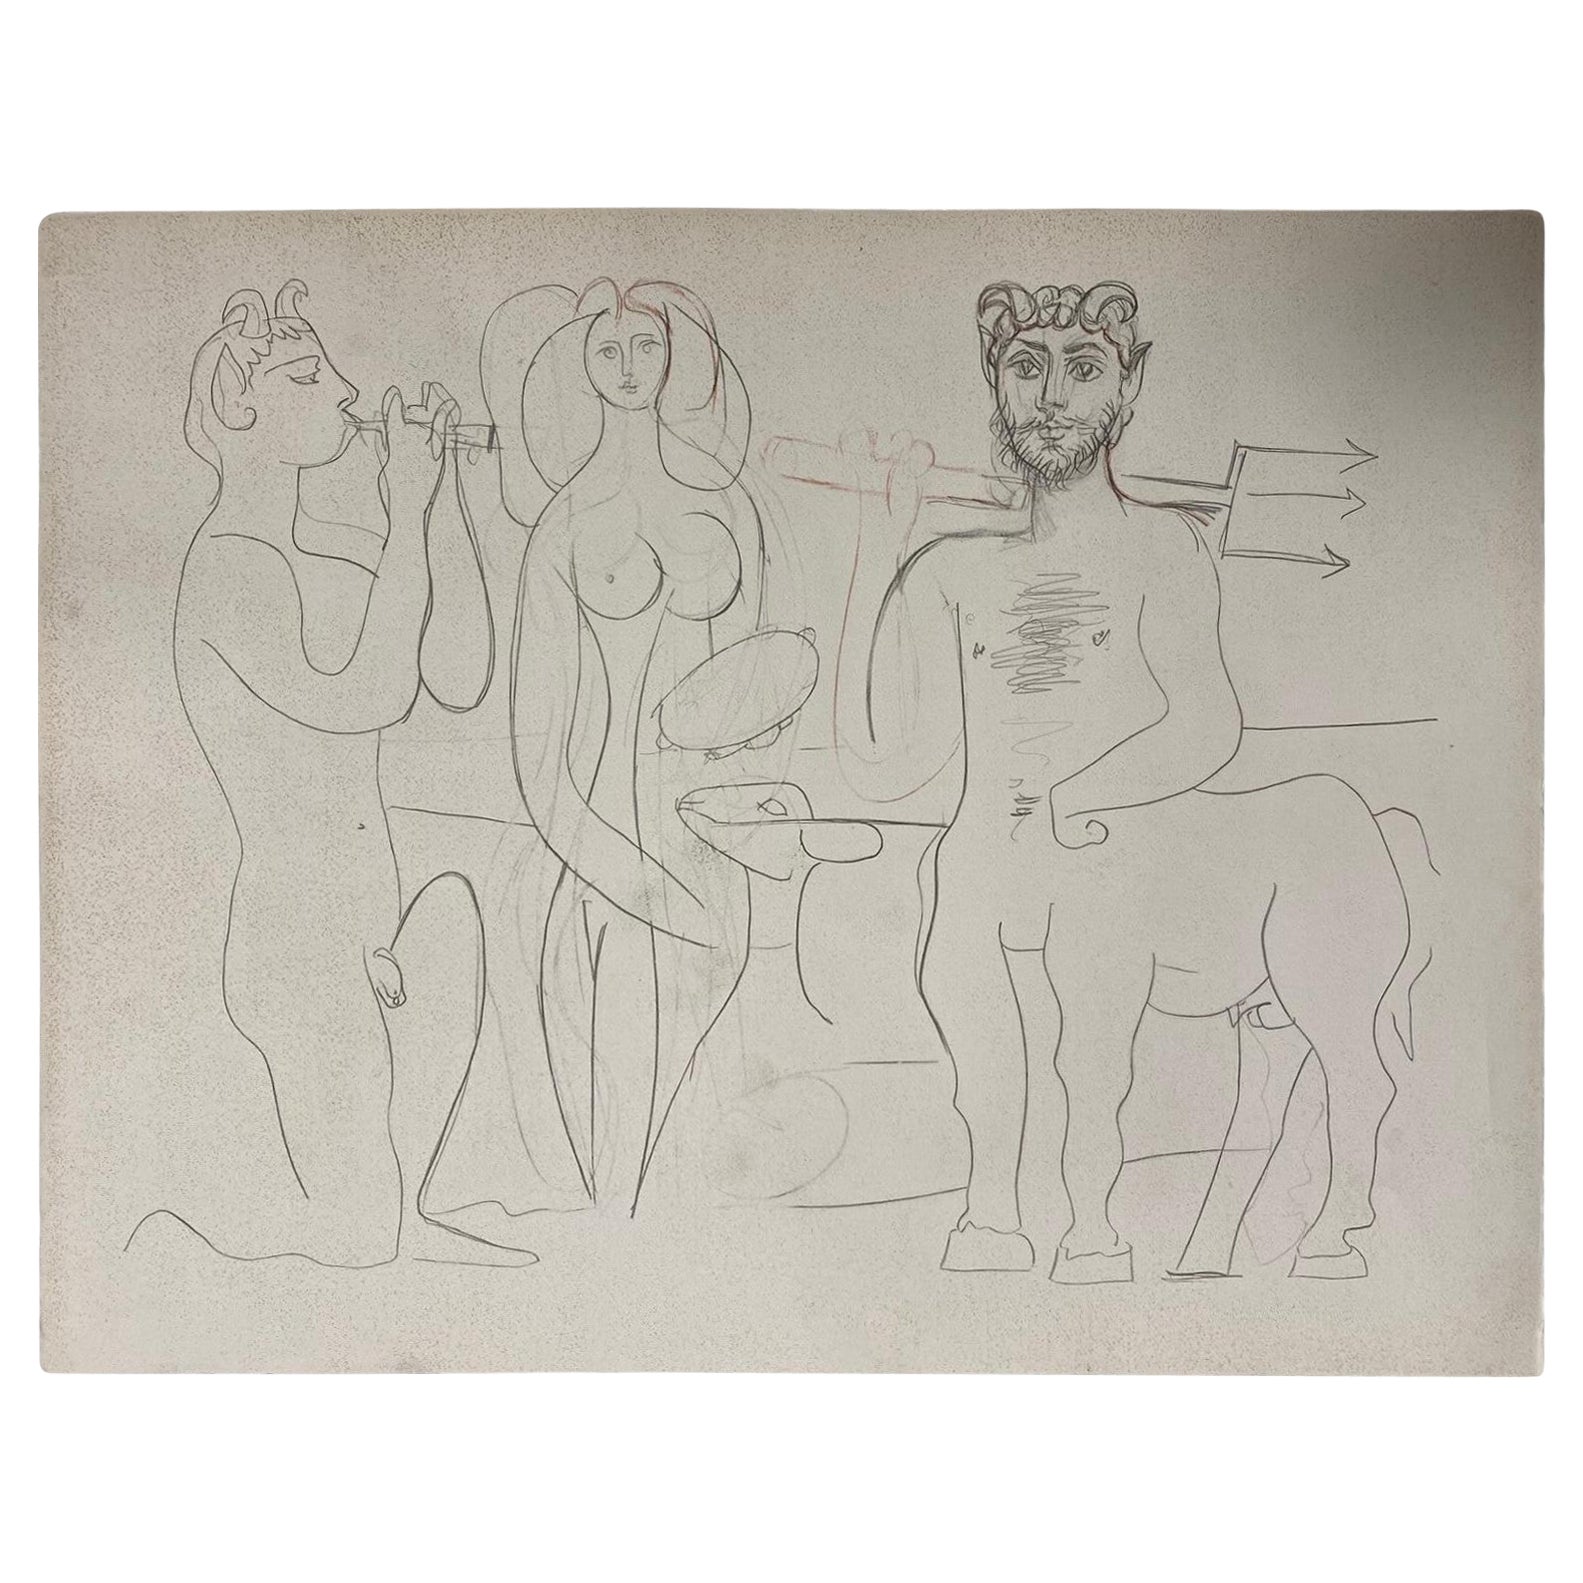 Pablo Picasso Limited Ed. Lithograph From Portfolio Les Dessins D'Antibes, 1958